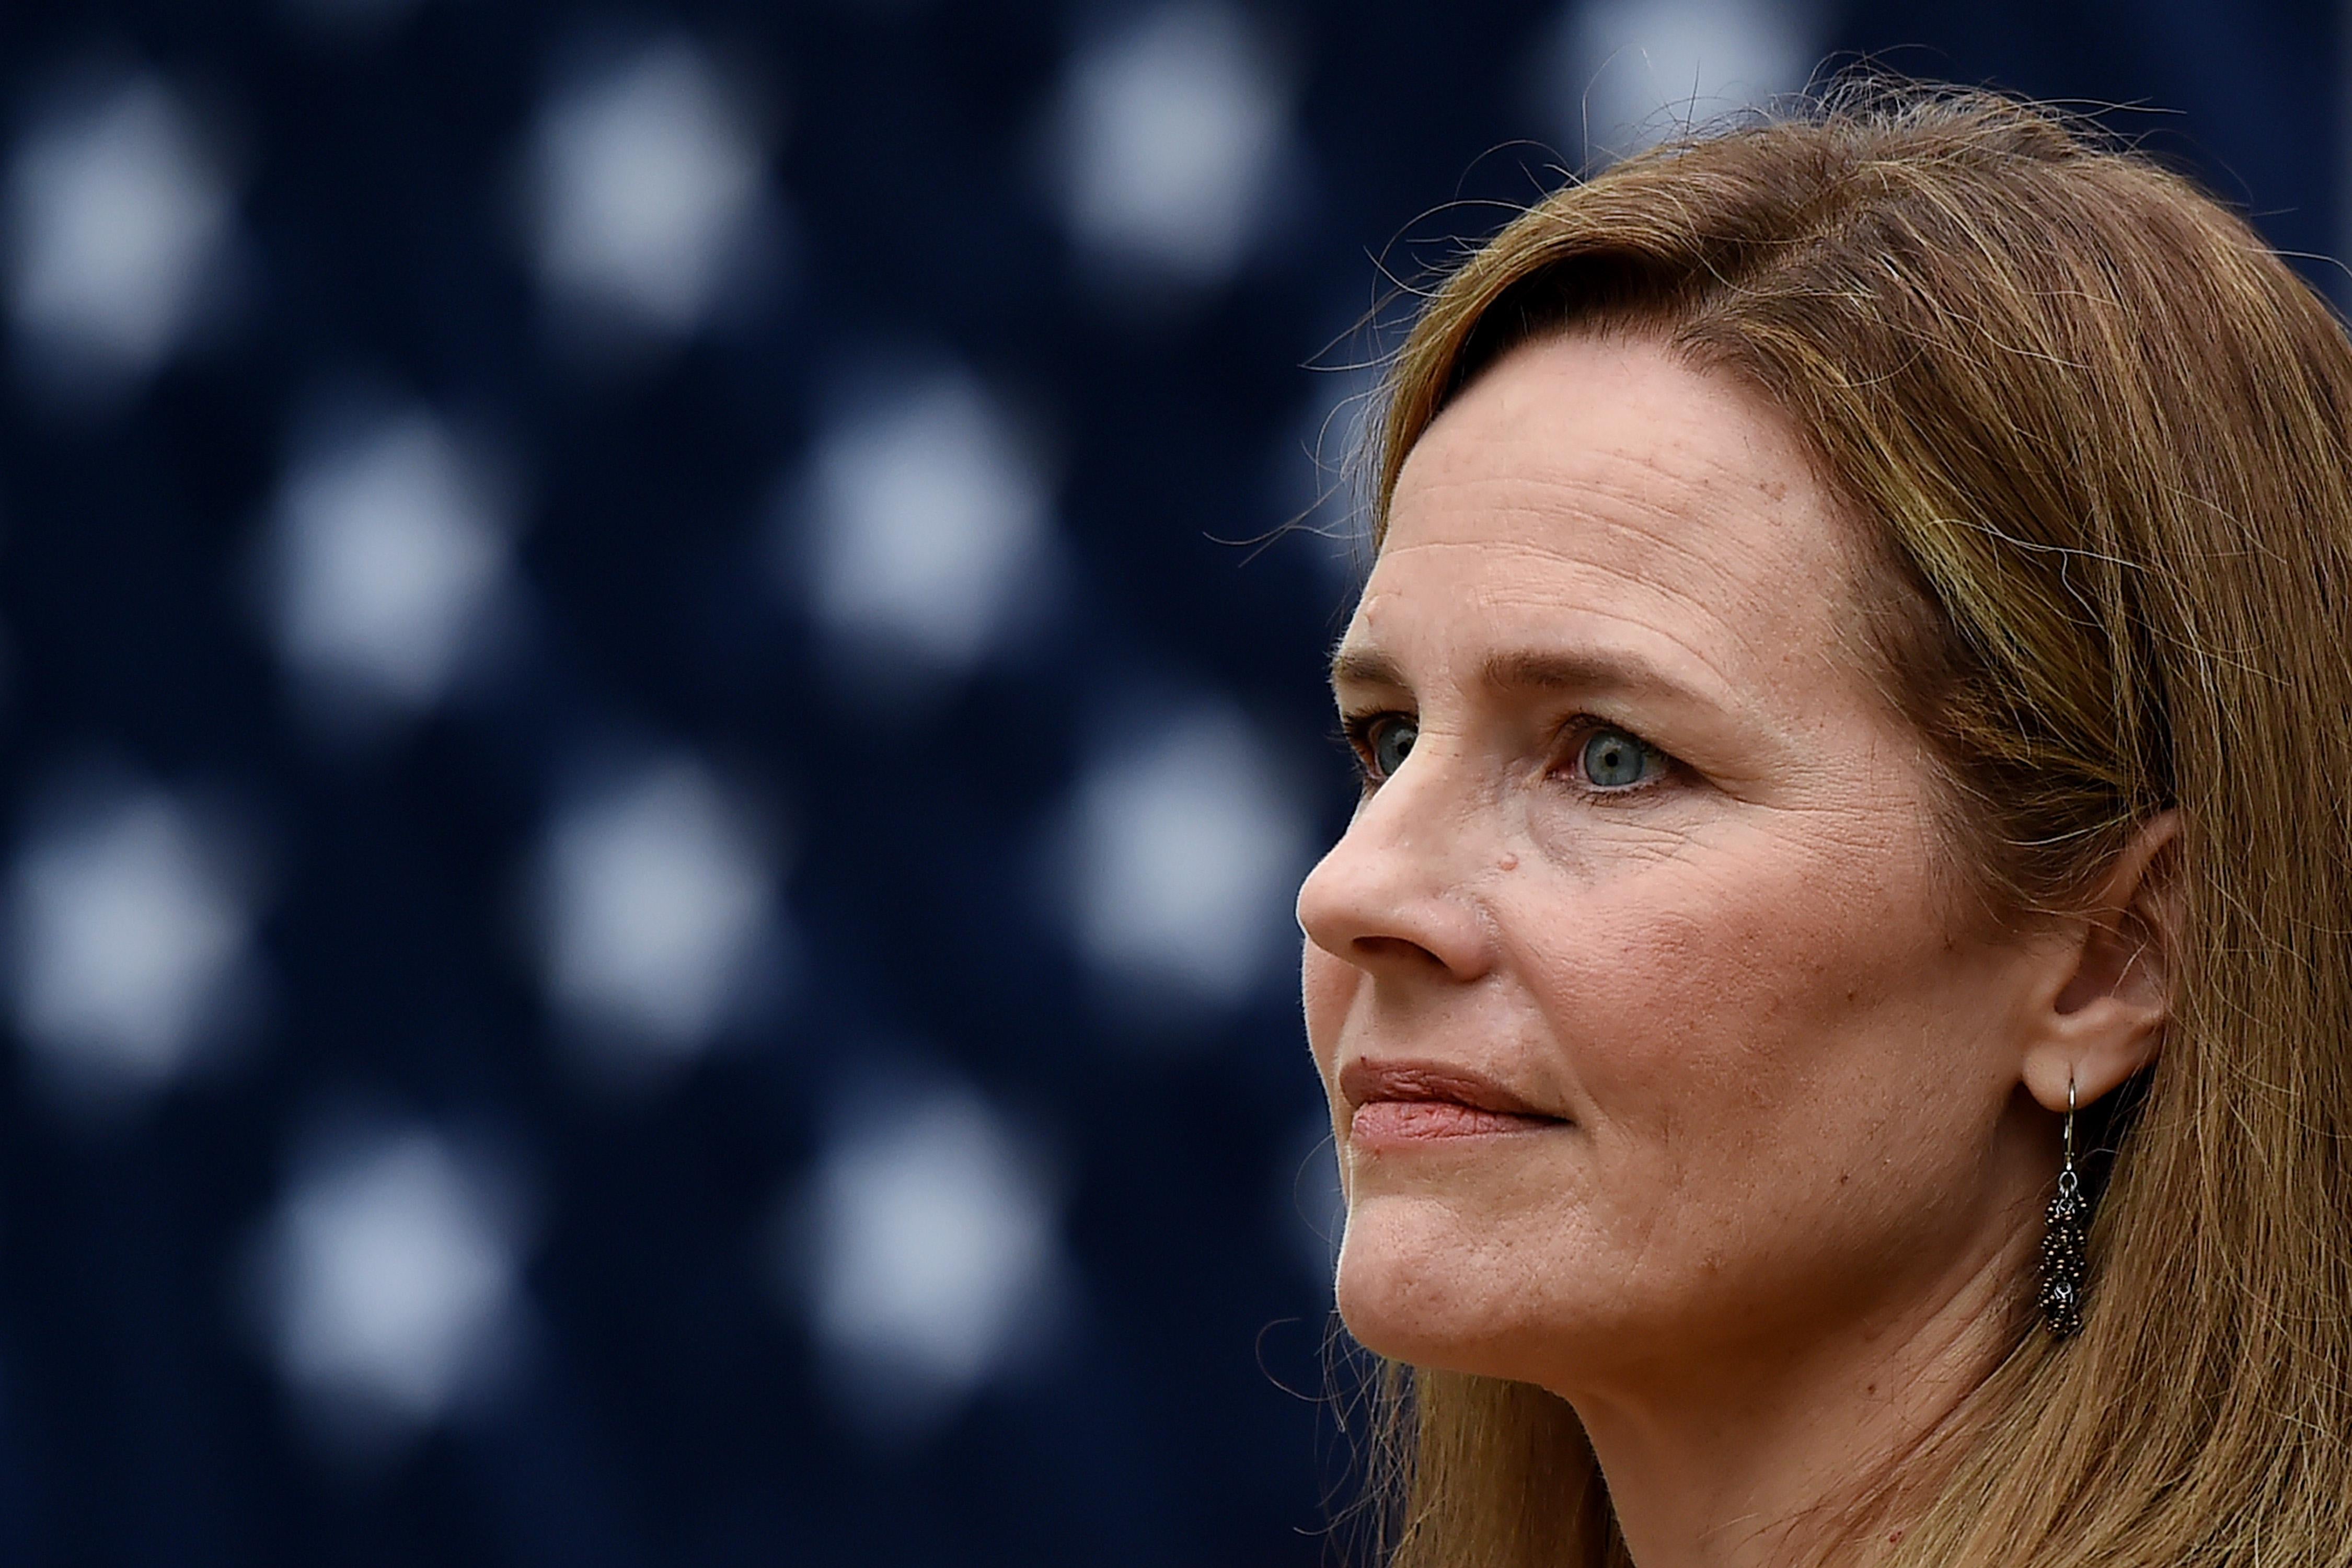 Amy Coney Barrett in profile with an American flag behind her.